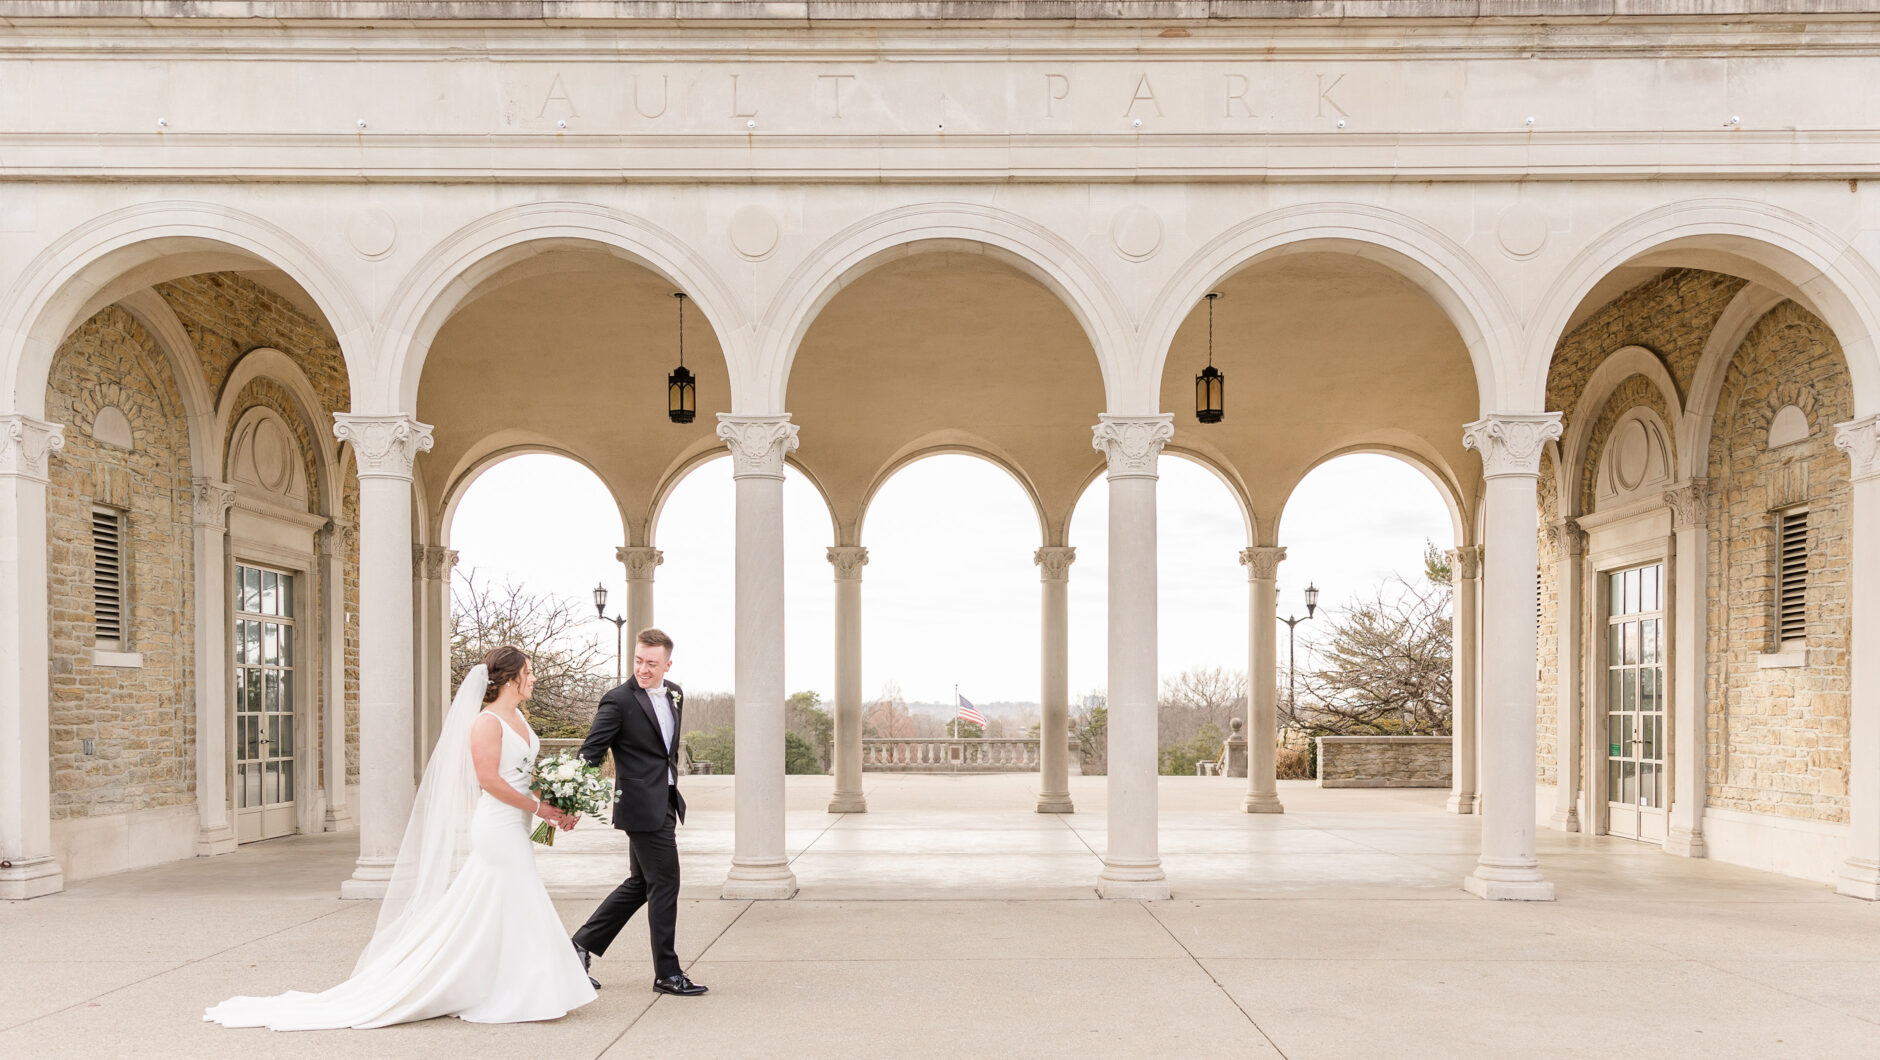 Bride and Groom holding hands in front of stone carved archways at Ault park at sunset